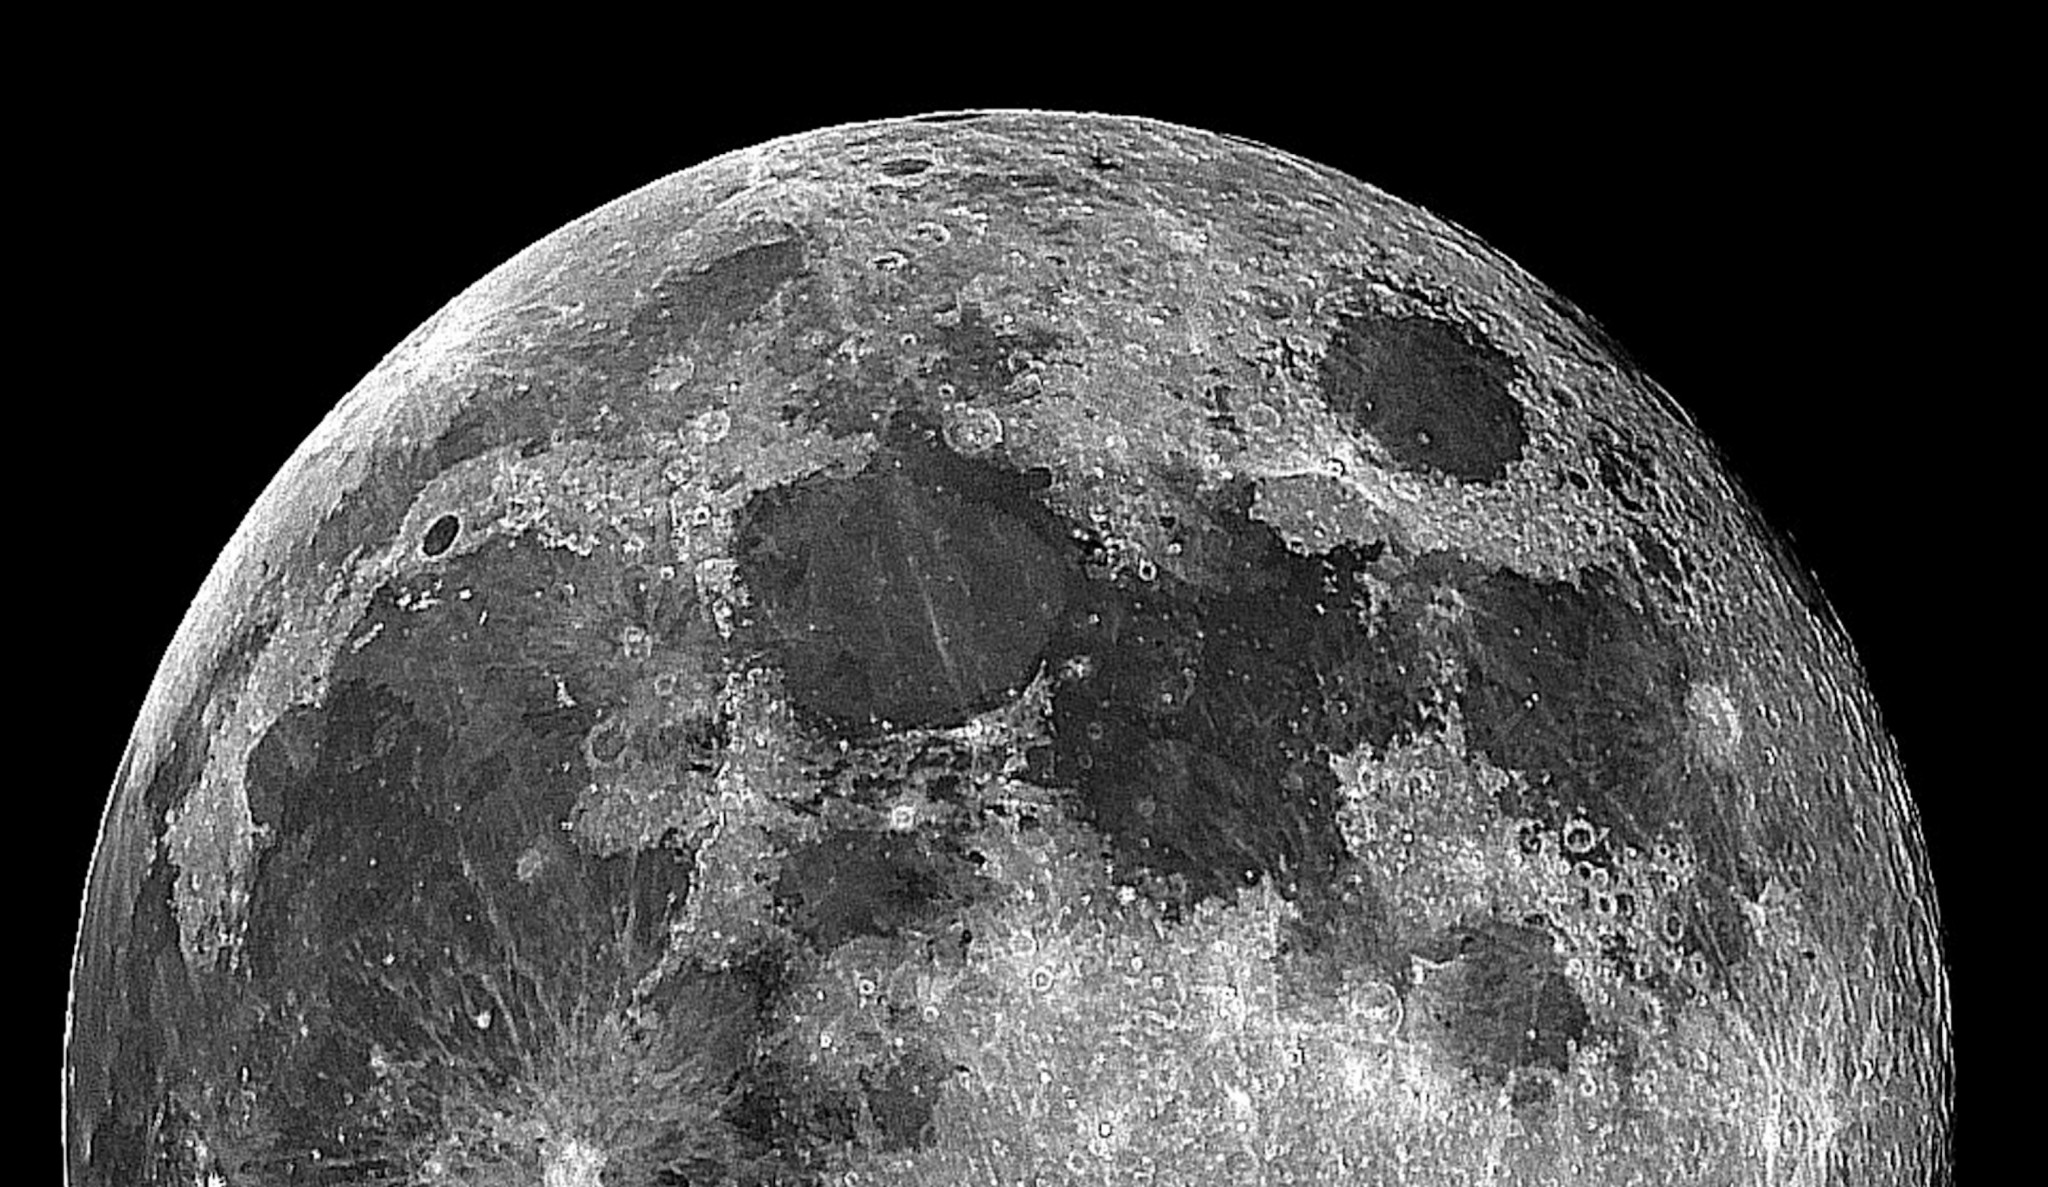 moon wallpaper hd,moon,black and white,monochrome photography,astronomical object,monochrome